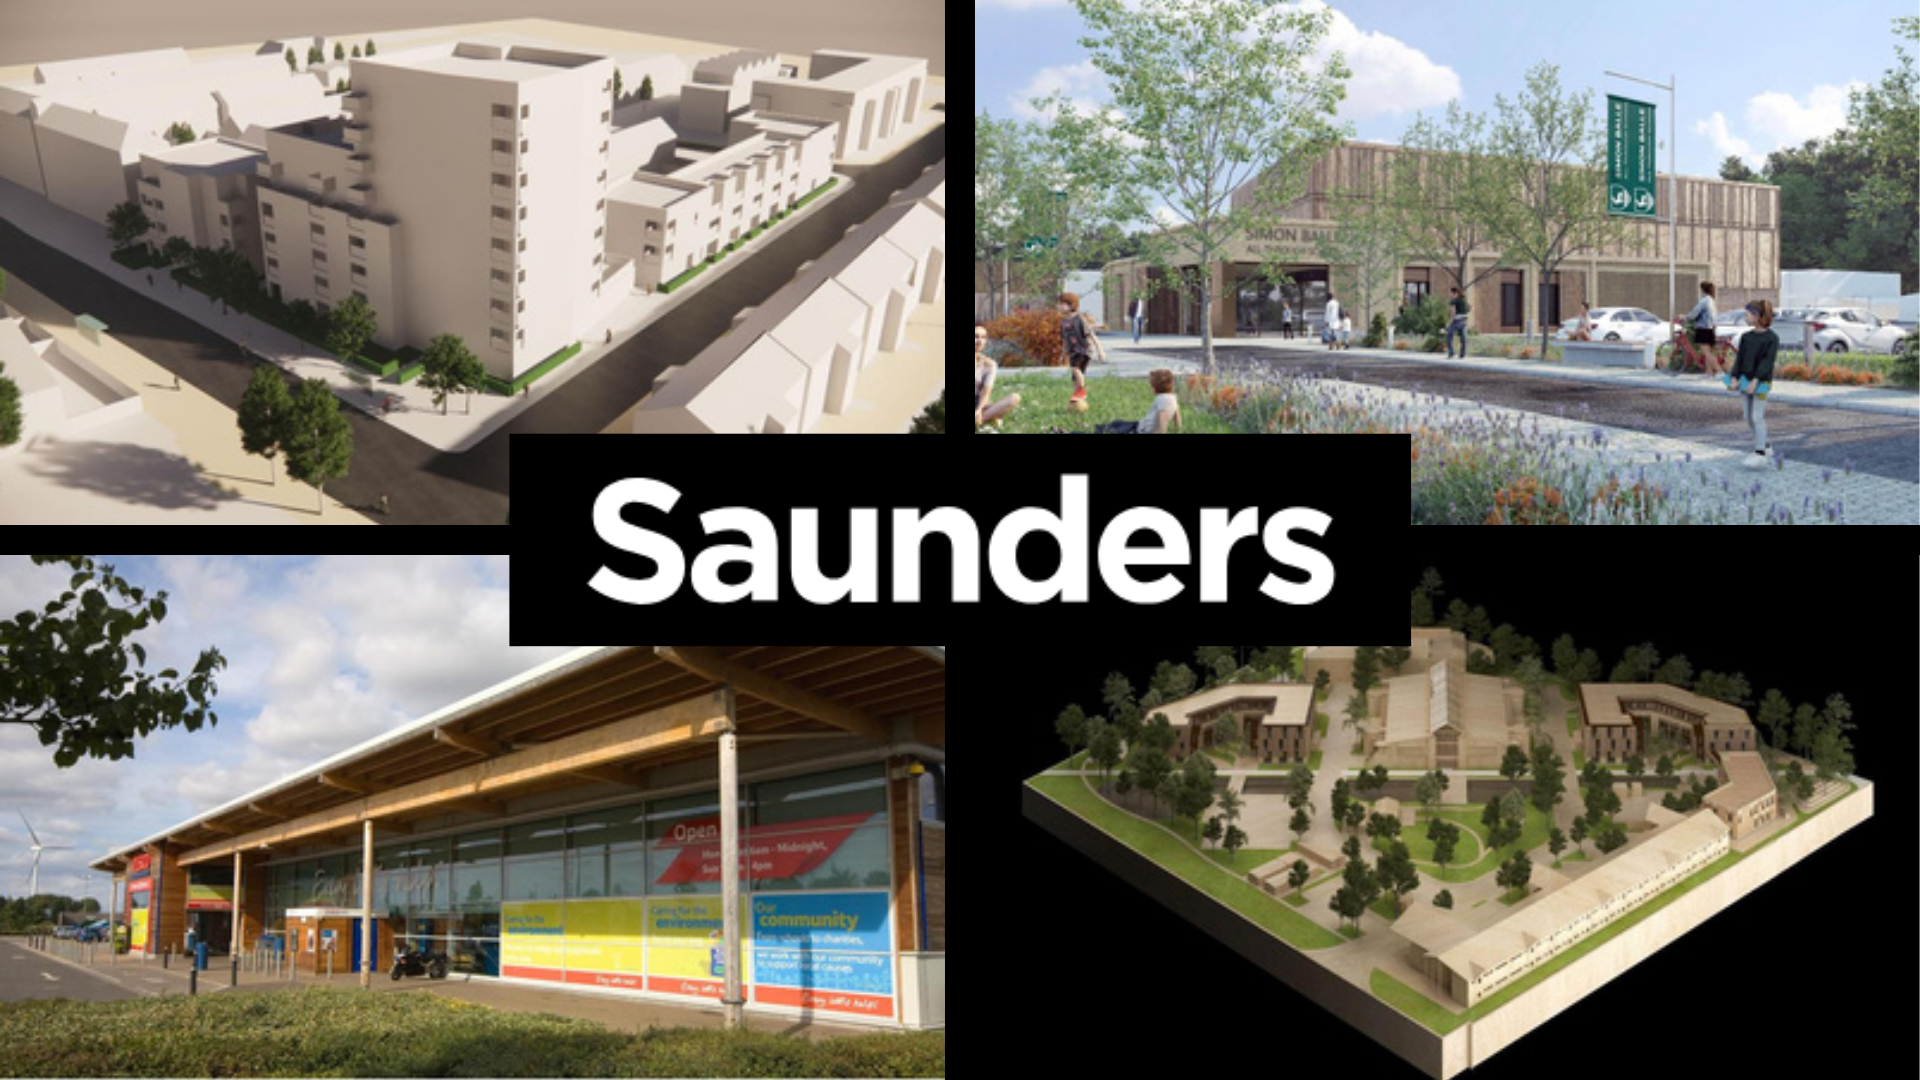 Saunders: Leading the way on sustainable architecture